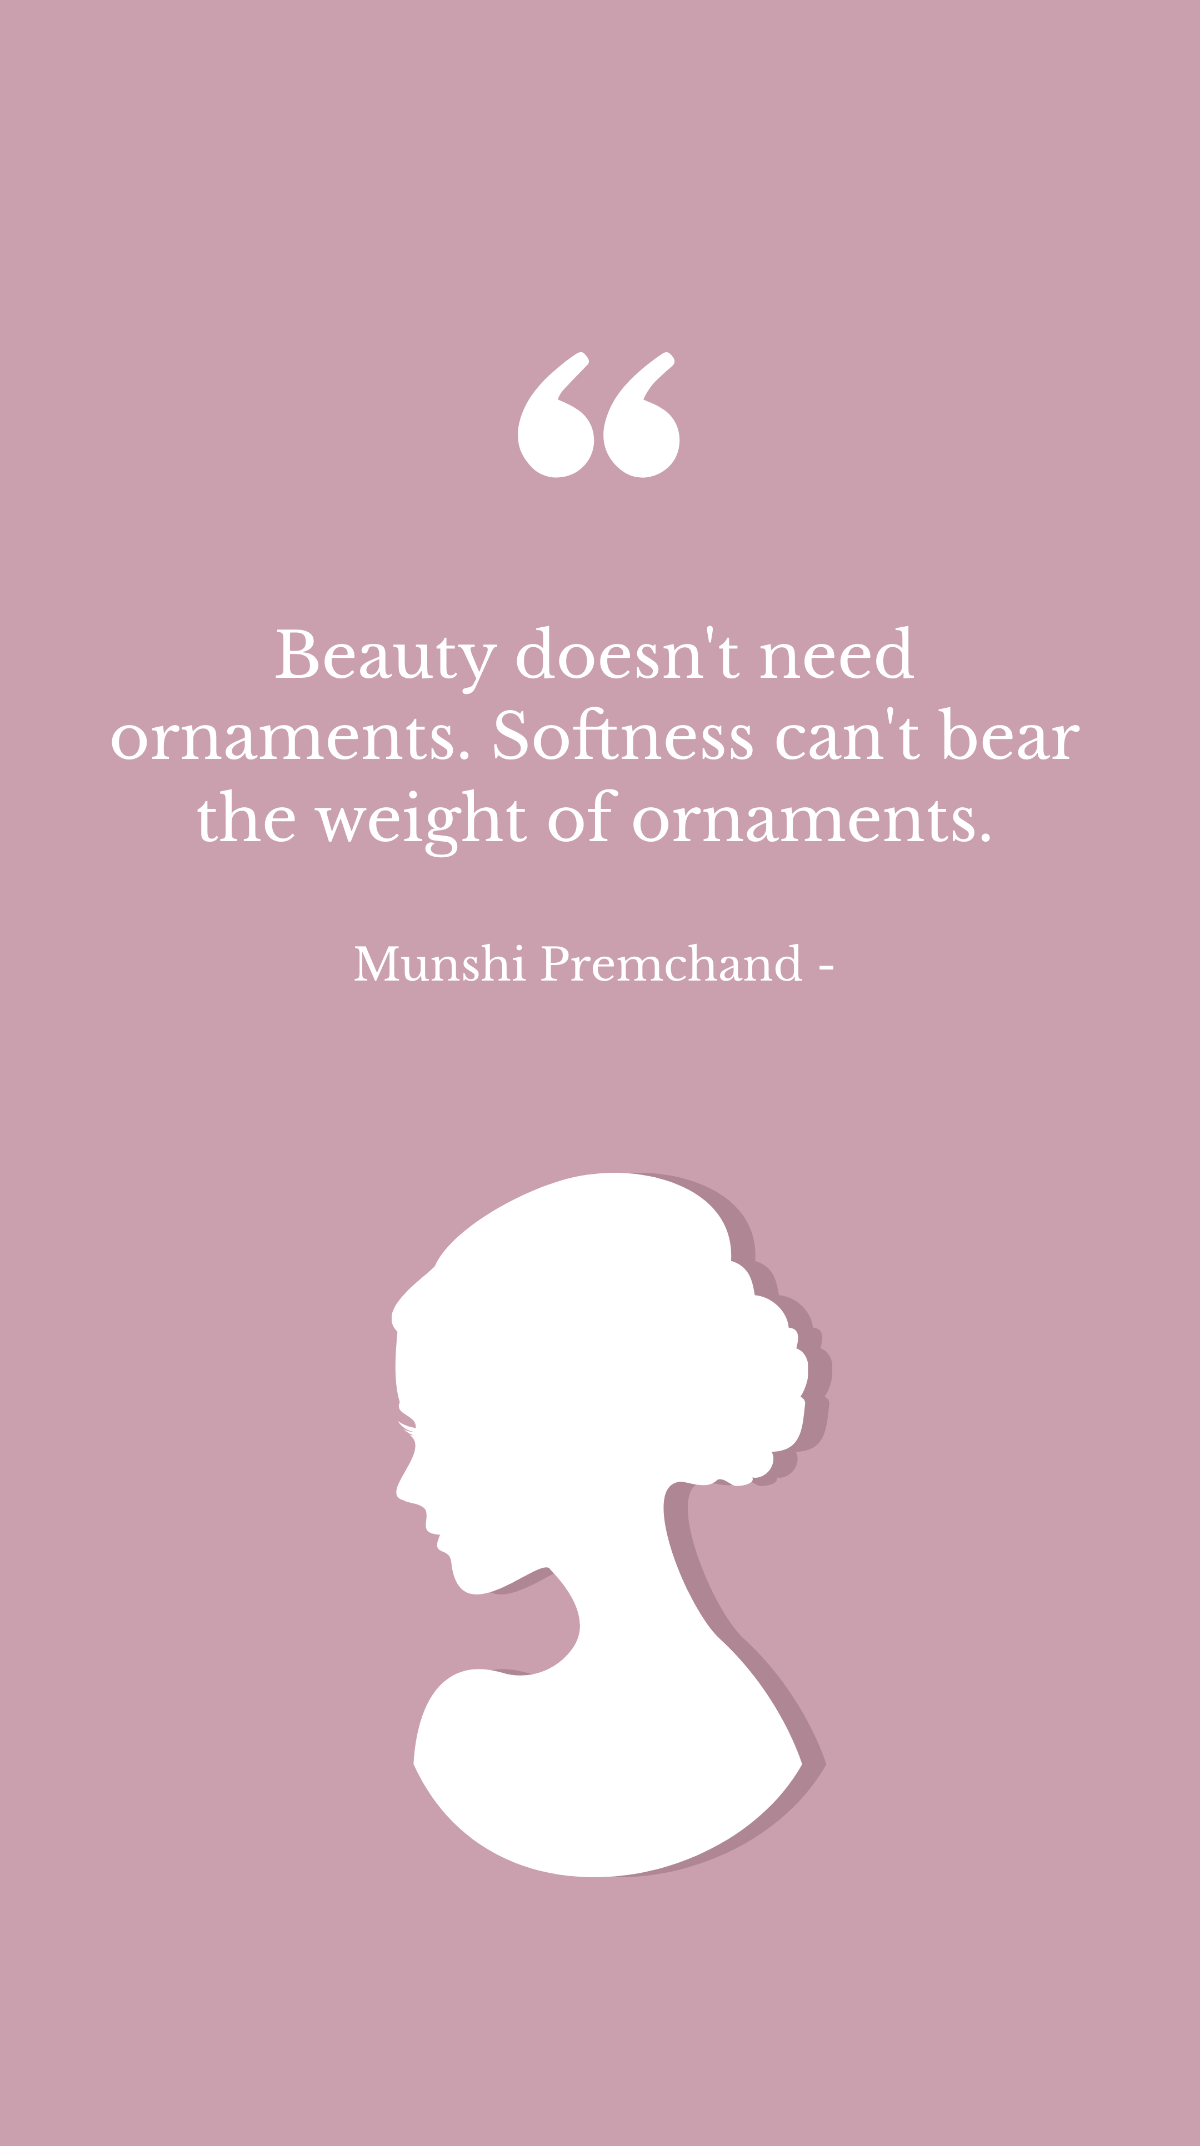 Munshi Premchand - Beauty doesn't need ornaments. Softness can't bear the weight of ornaments.